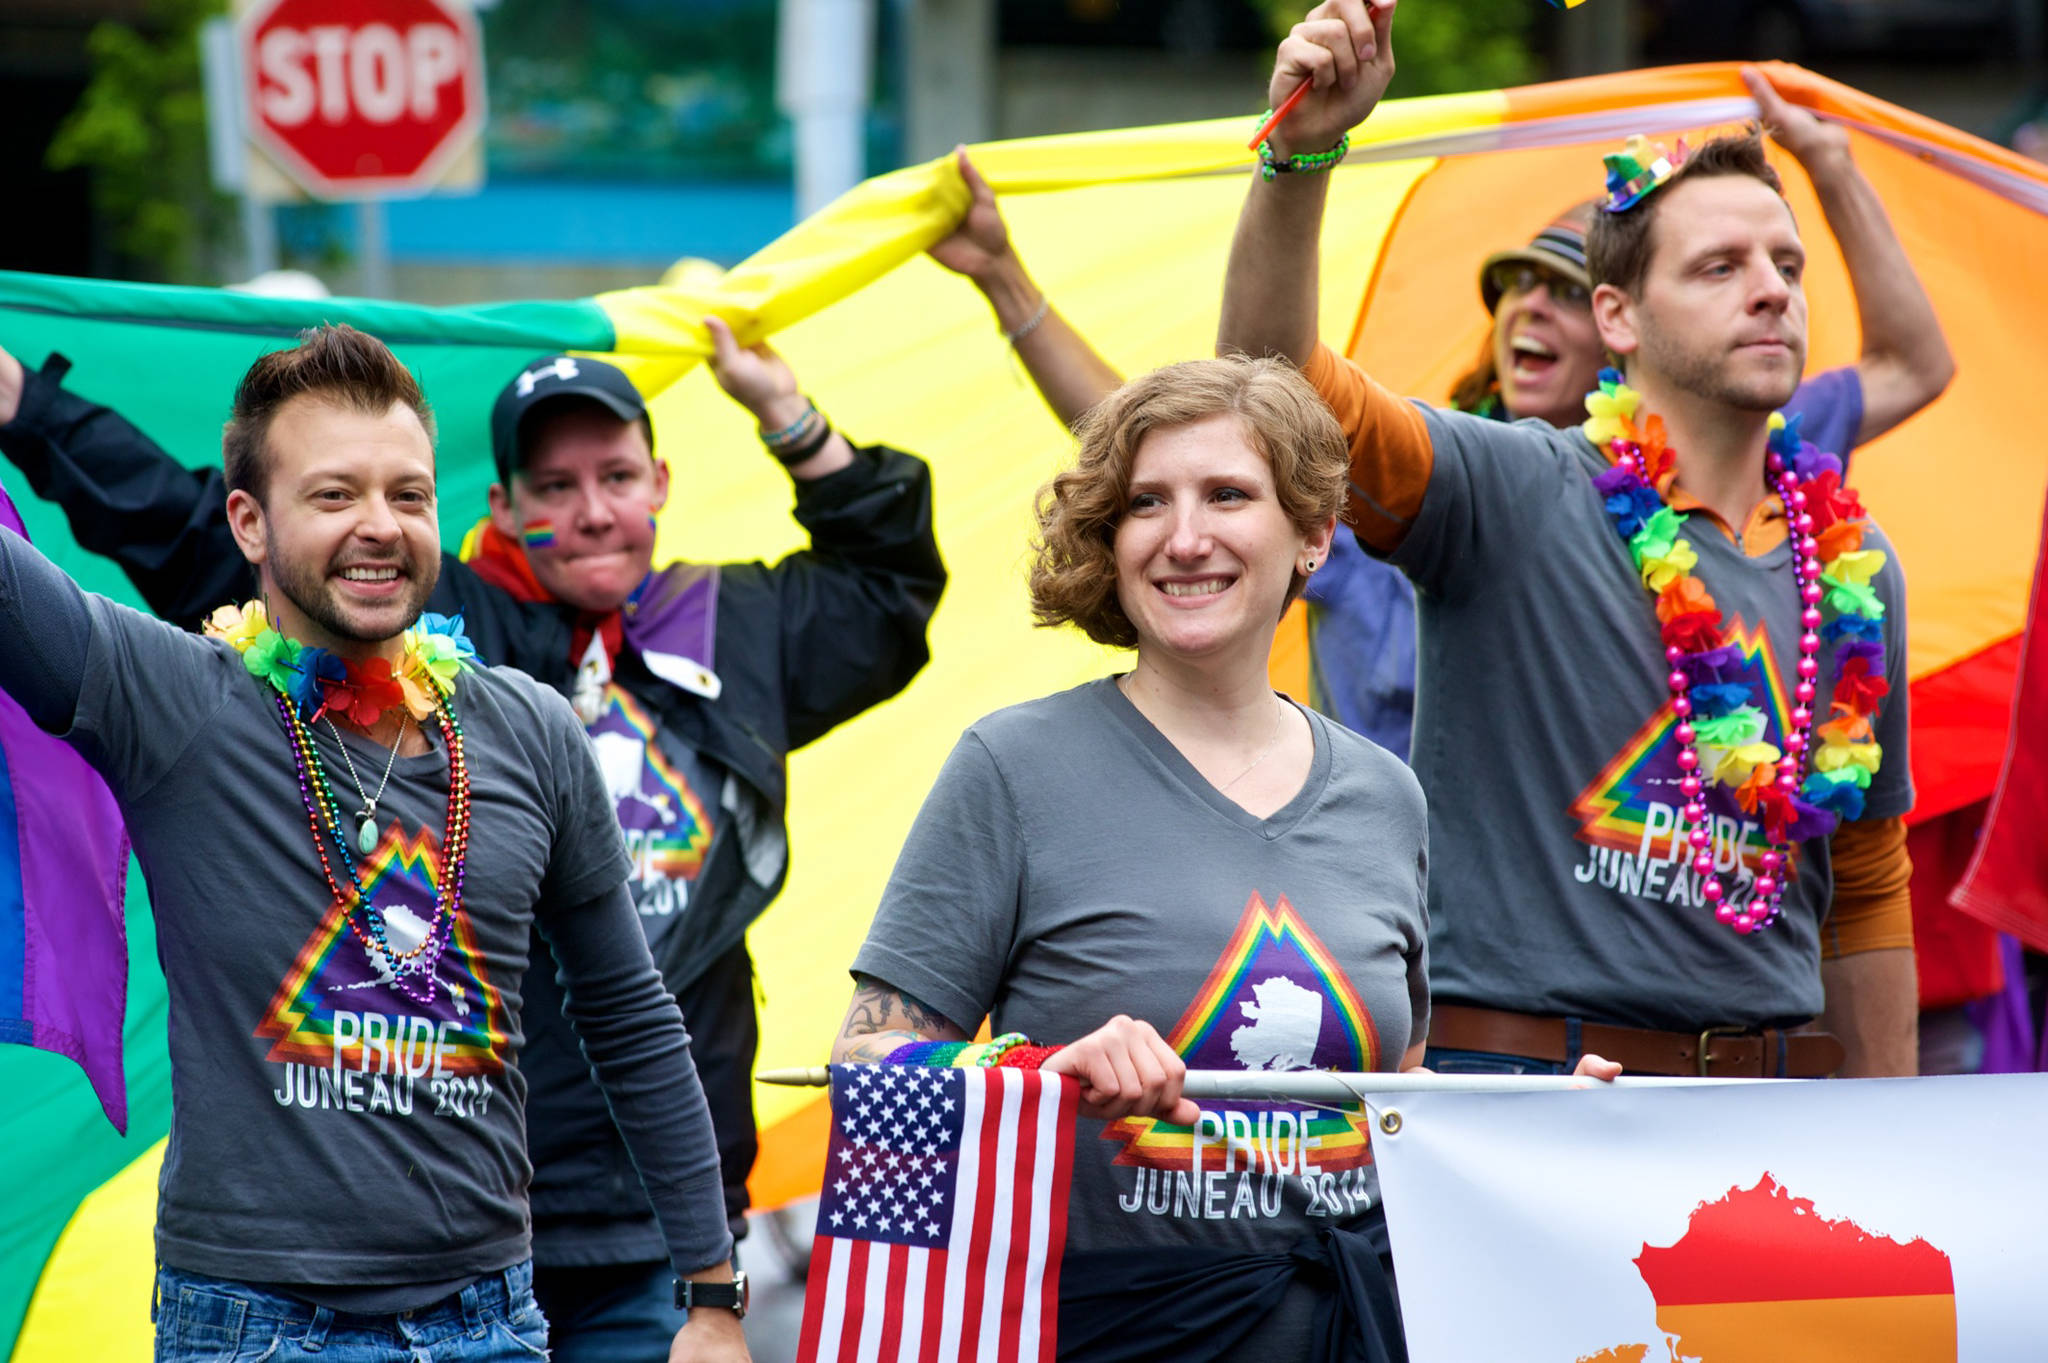 Members of the LGBT community show their pride in the 2014 Juneau Fourth of July Parade. (Michael Penn | Juneau Empire File)